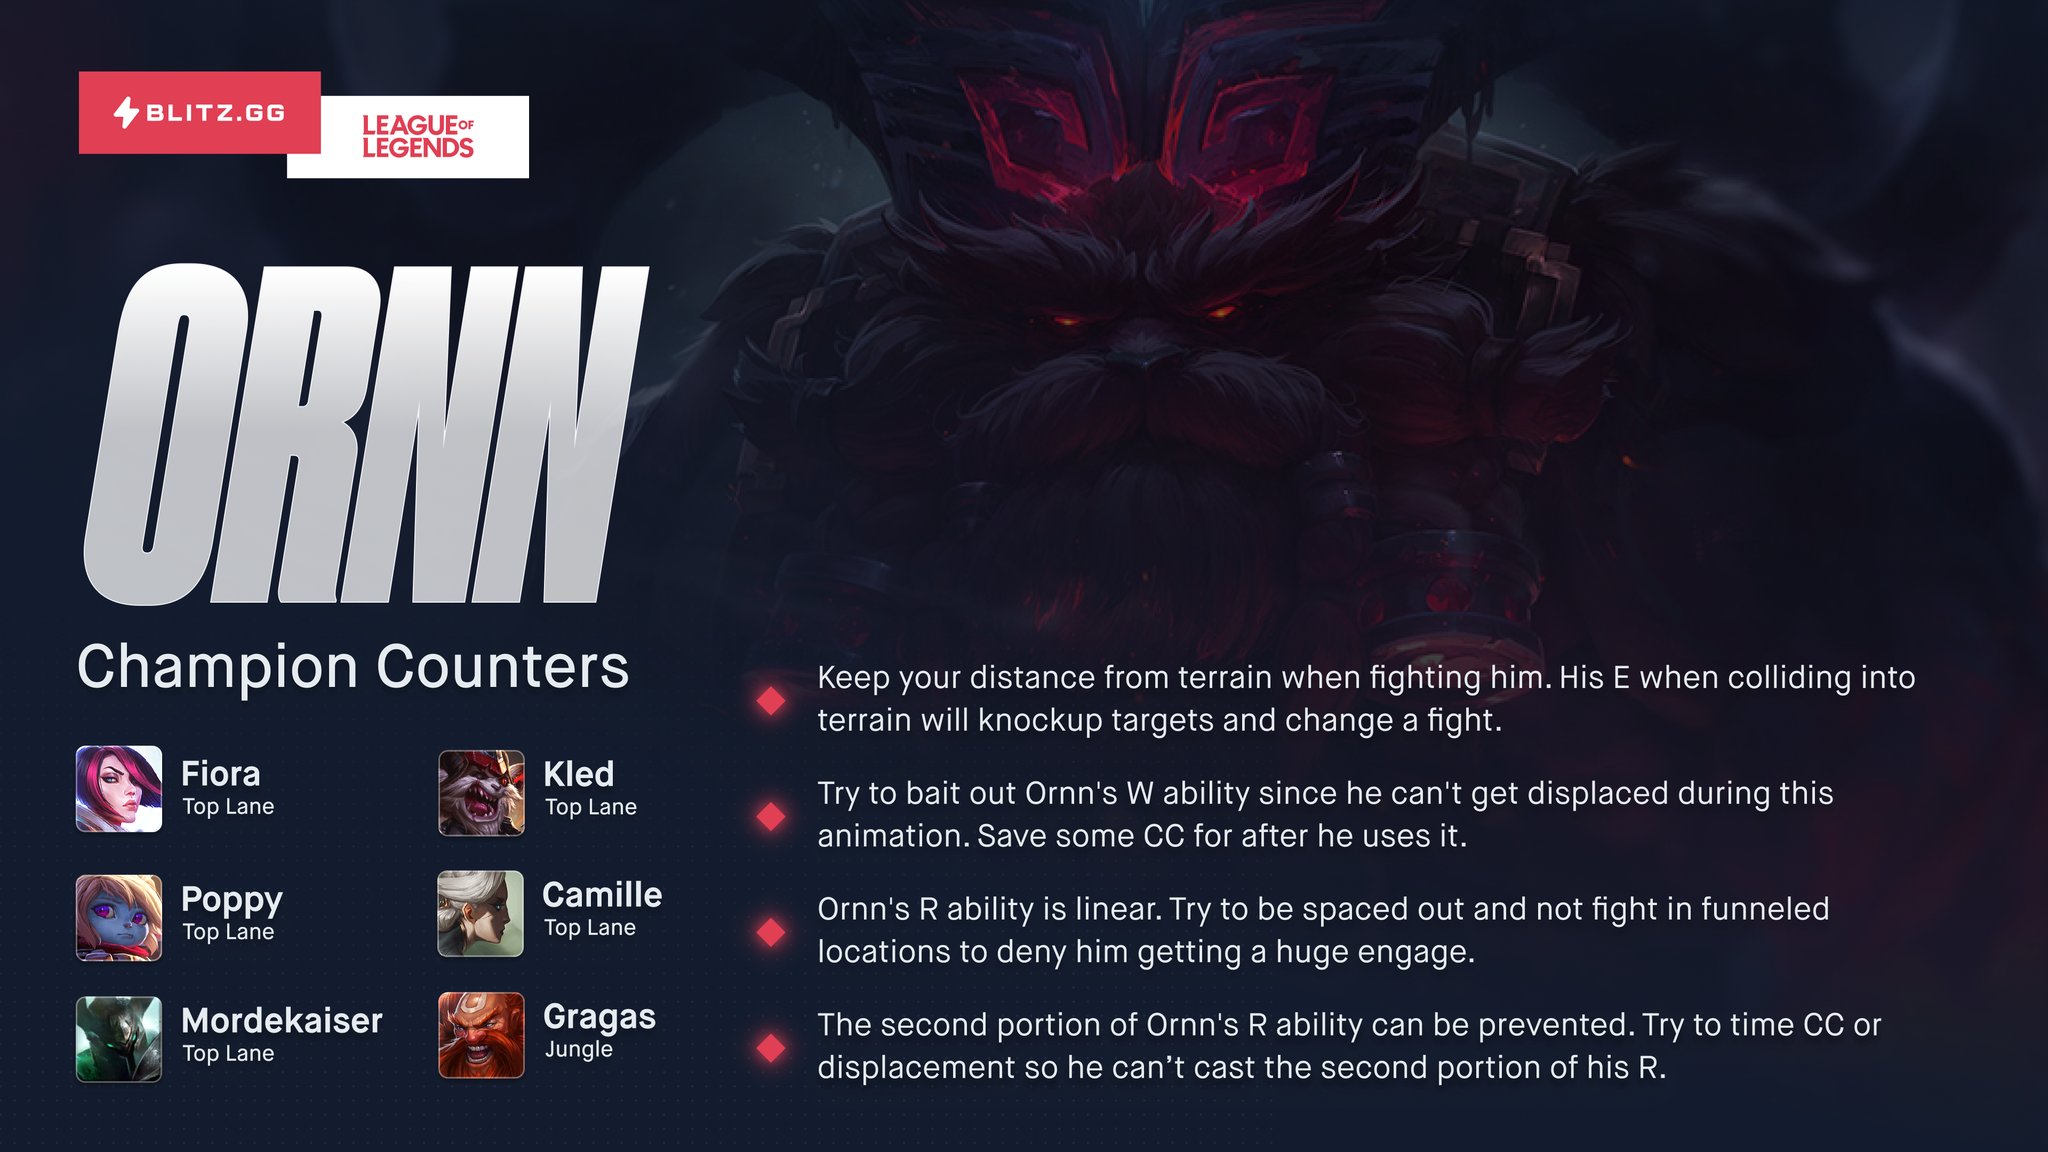 App a Twitter: "if the Ornn is someone's mythic that not yours, you are obviously not carrying hard enough and you need to step it up https://t.co/kq3A4UOgHN" / Twitter